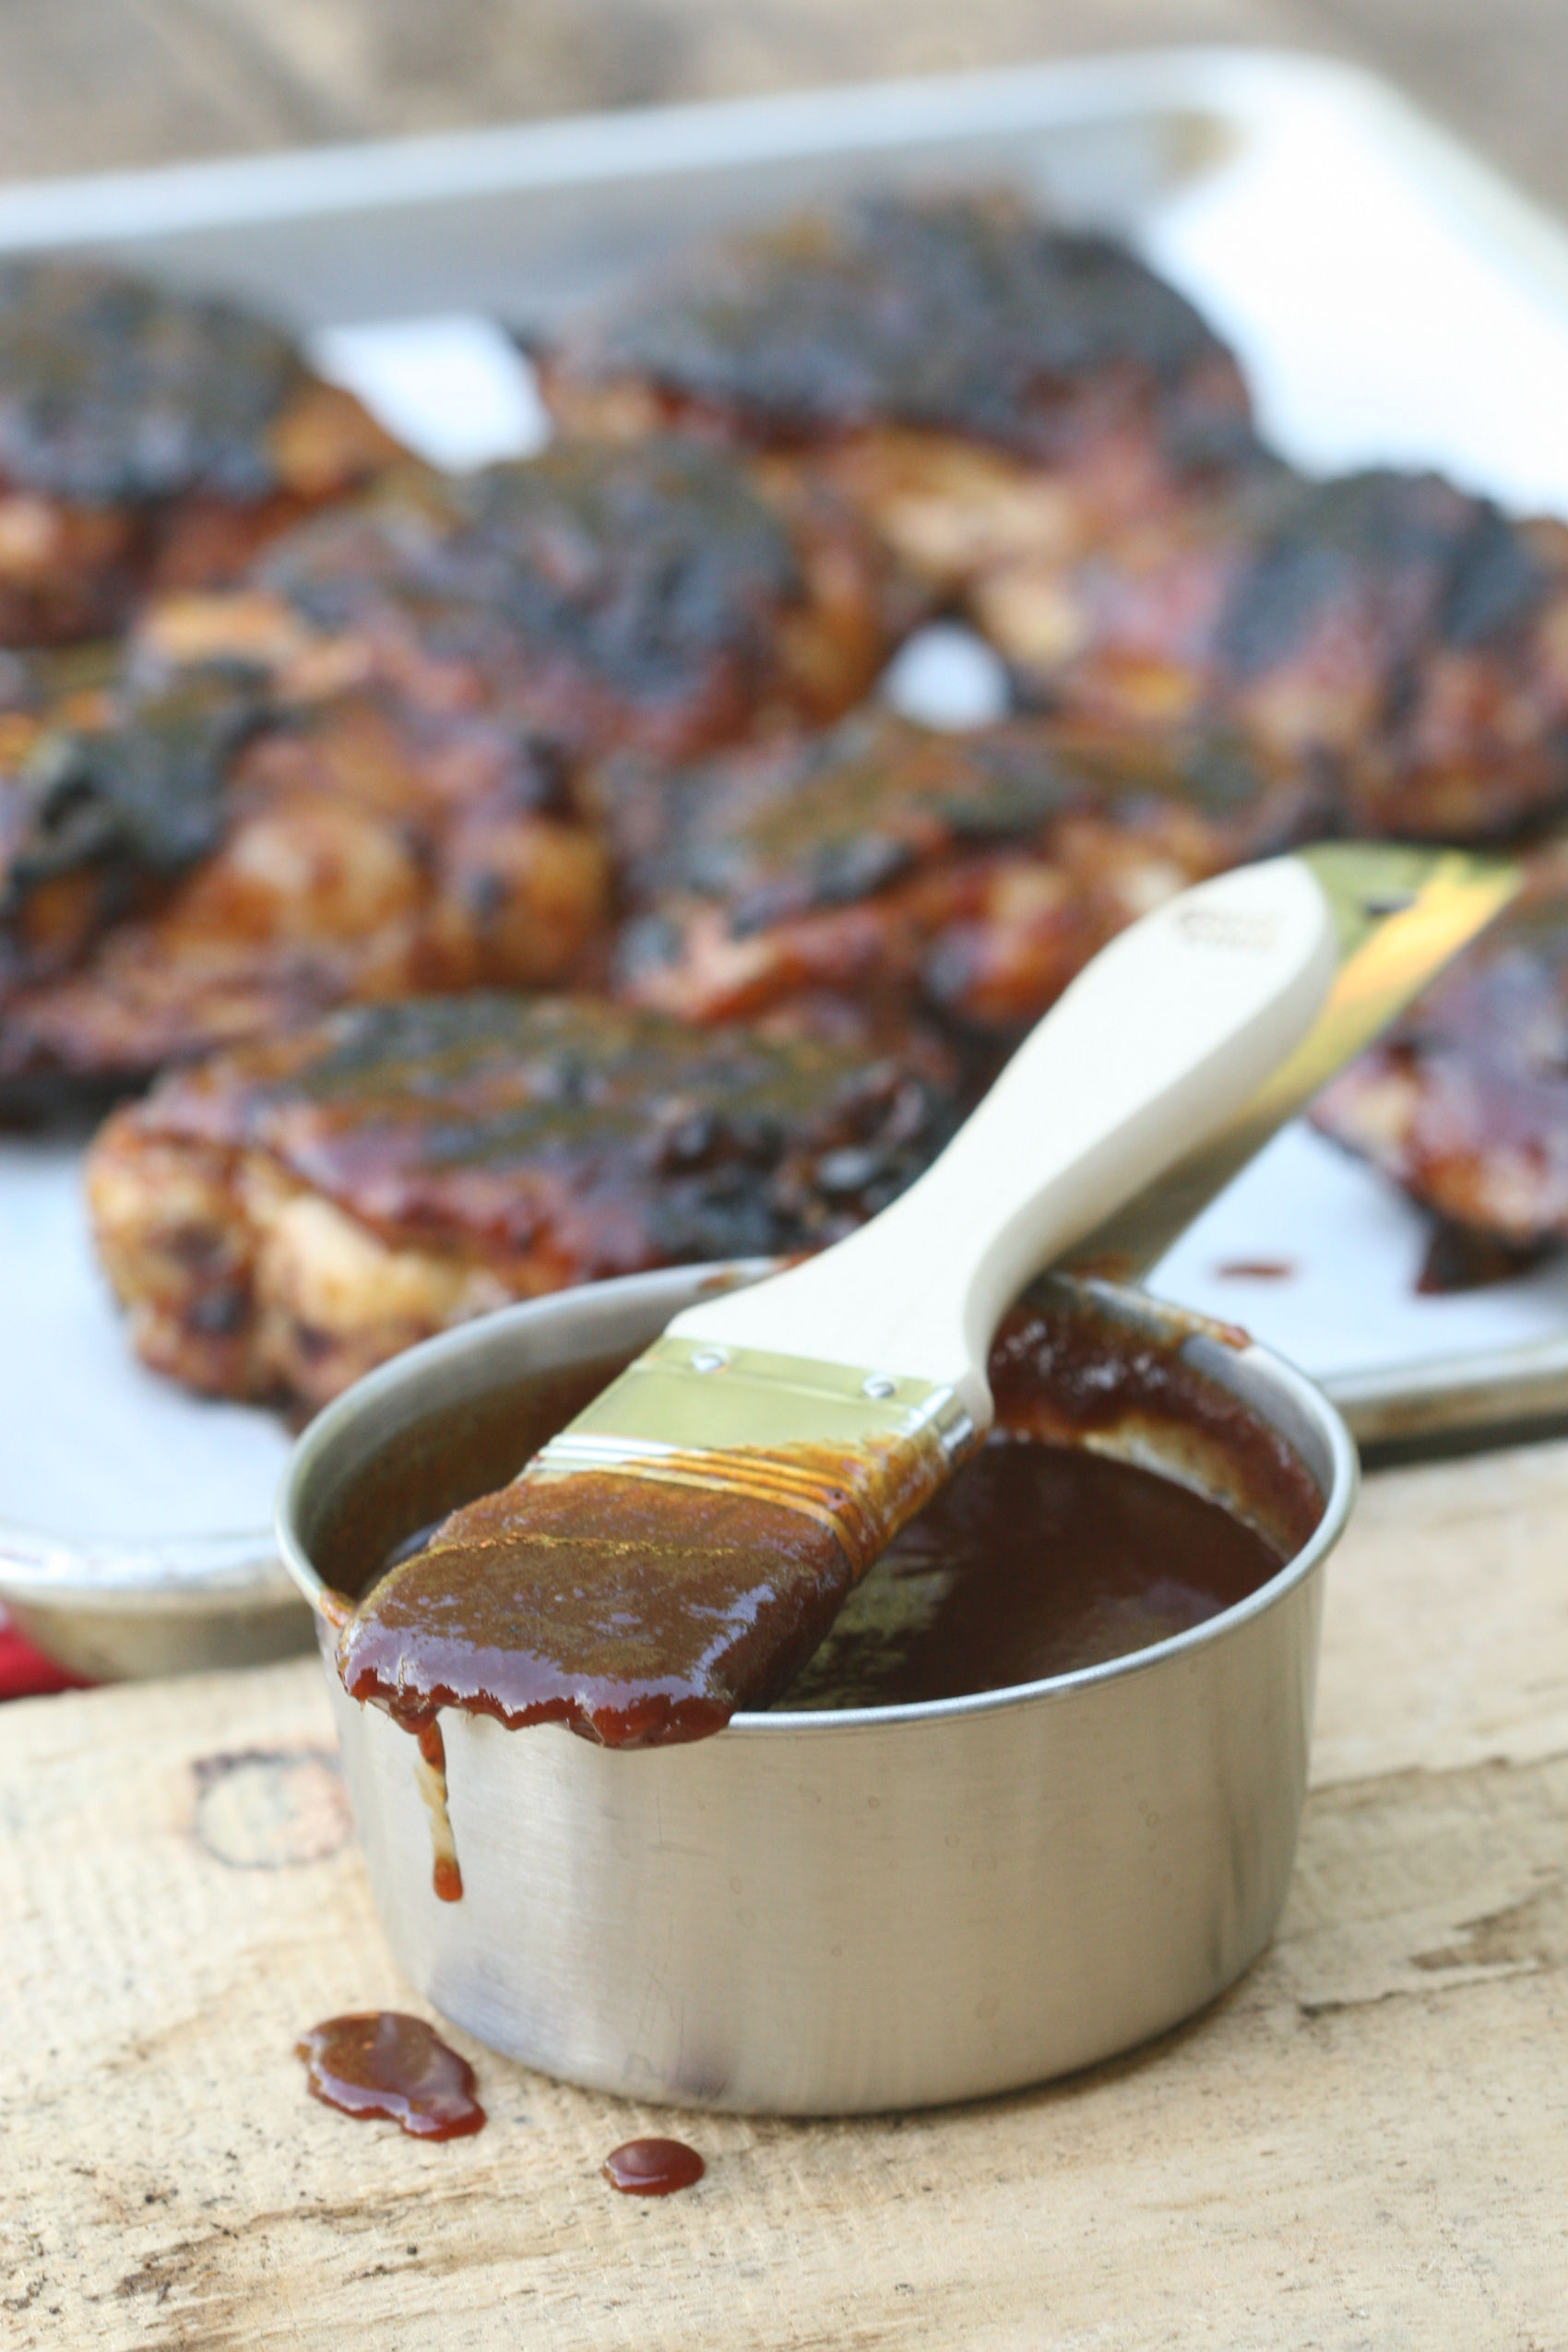 homemde barbecue sauce in metal measuring cup and wooden handle brush dripping with barbecue sauce.